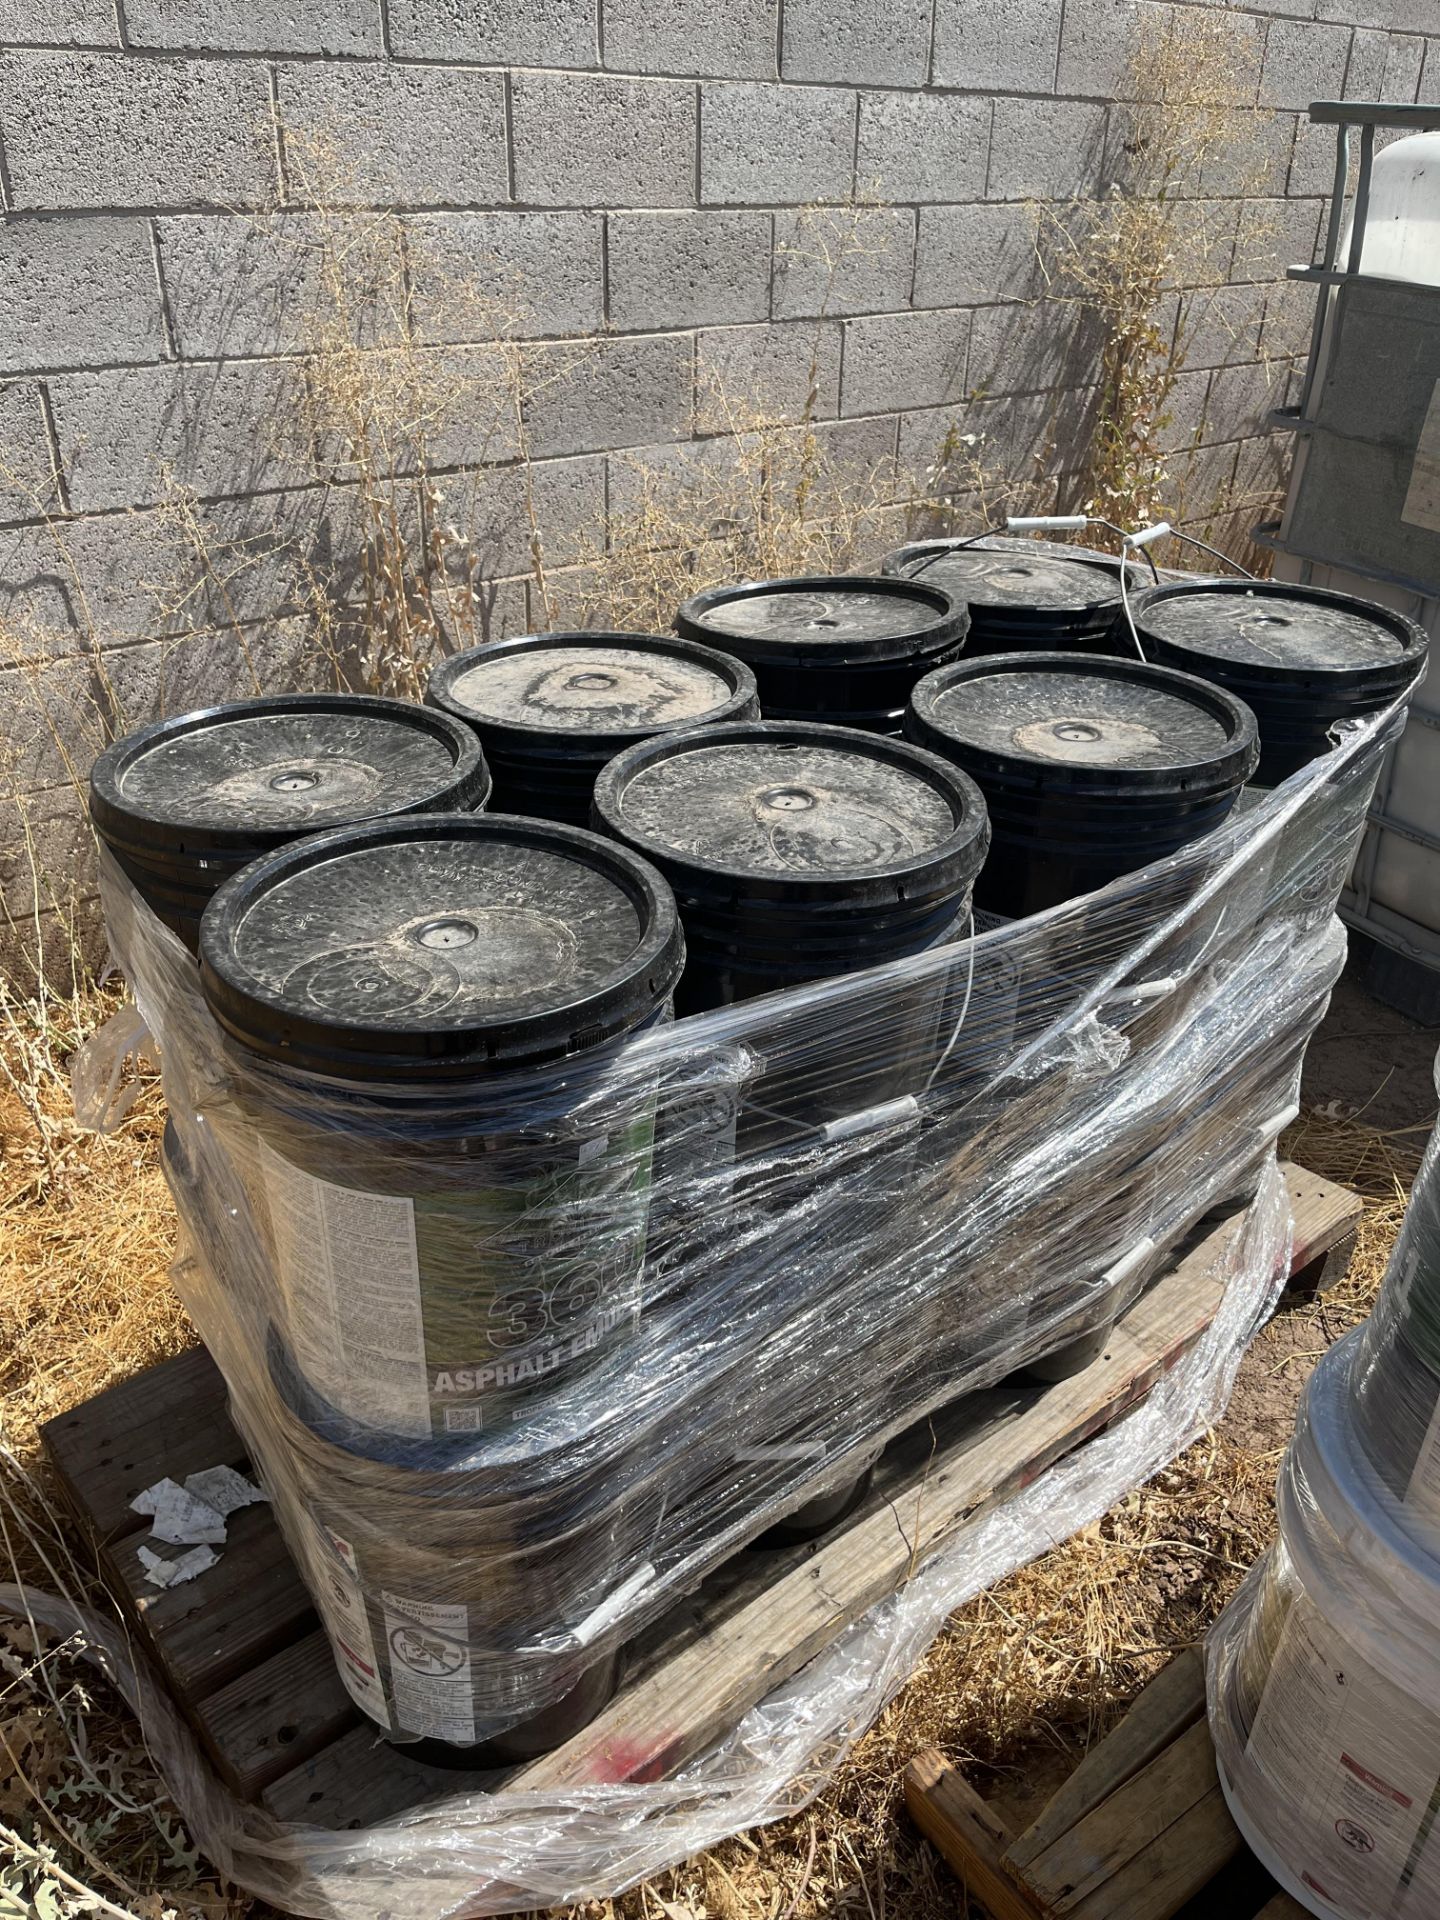 LOT PALLET OF TROPICAL ROOFING PRODUCTS 360 ASPHALT EMULSION, 5 GAL BUCKETS